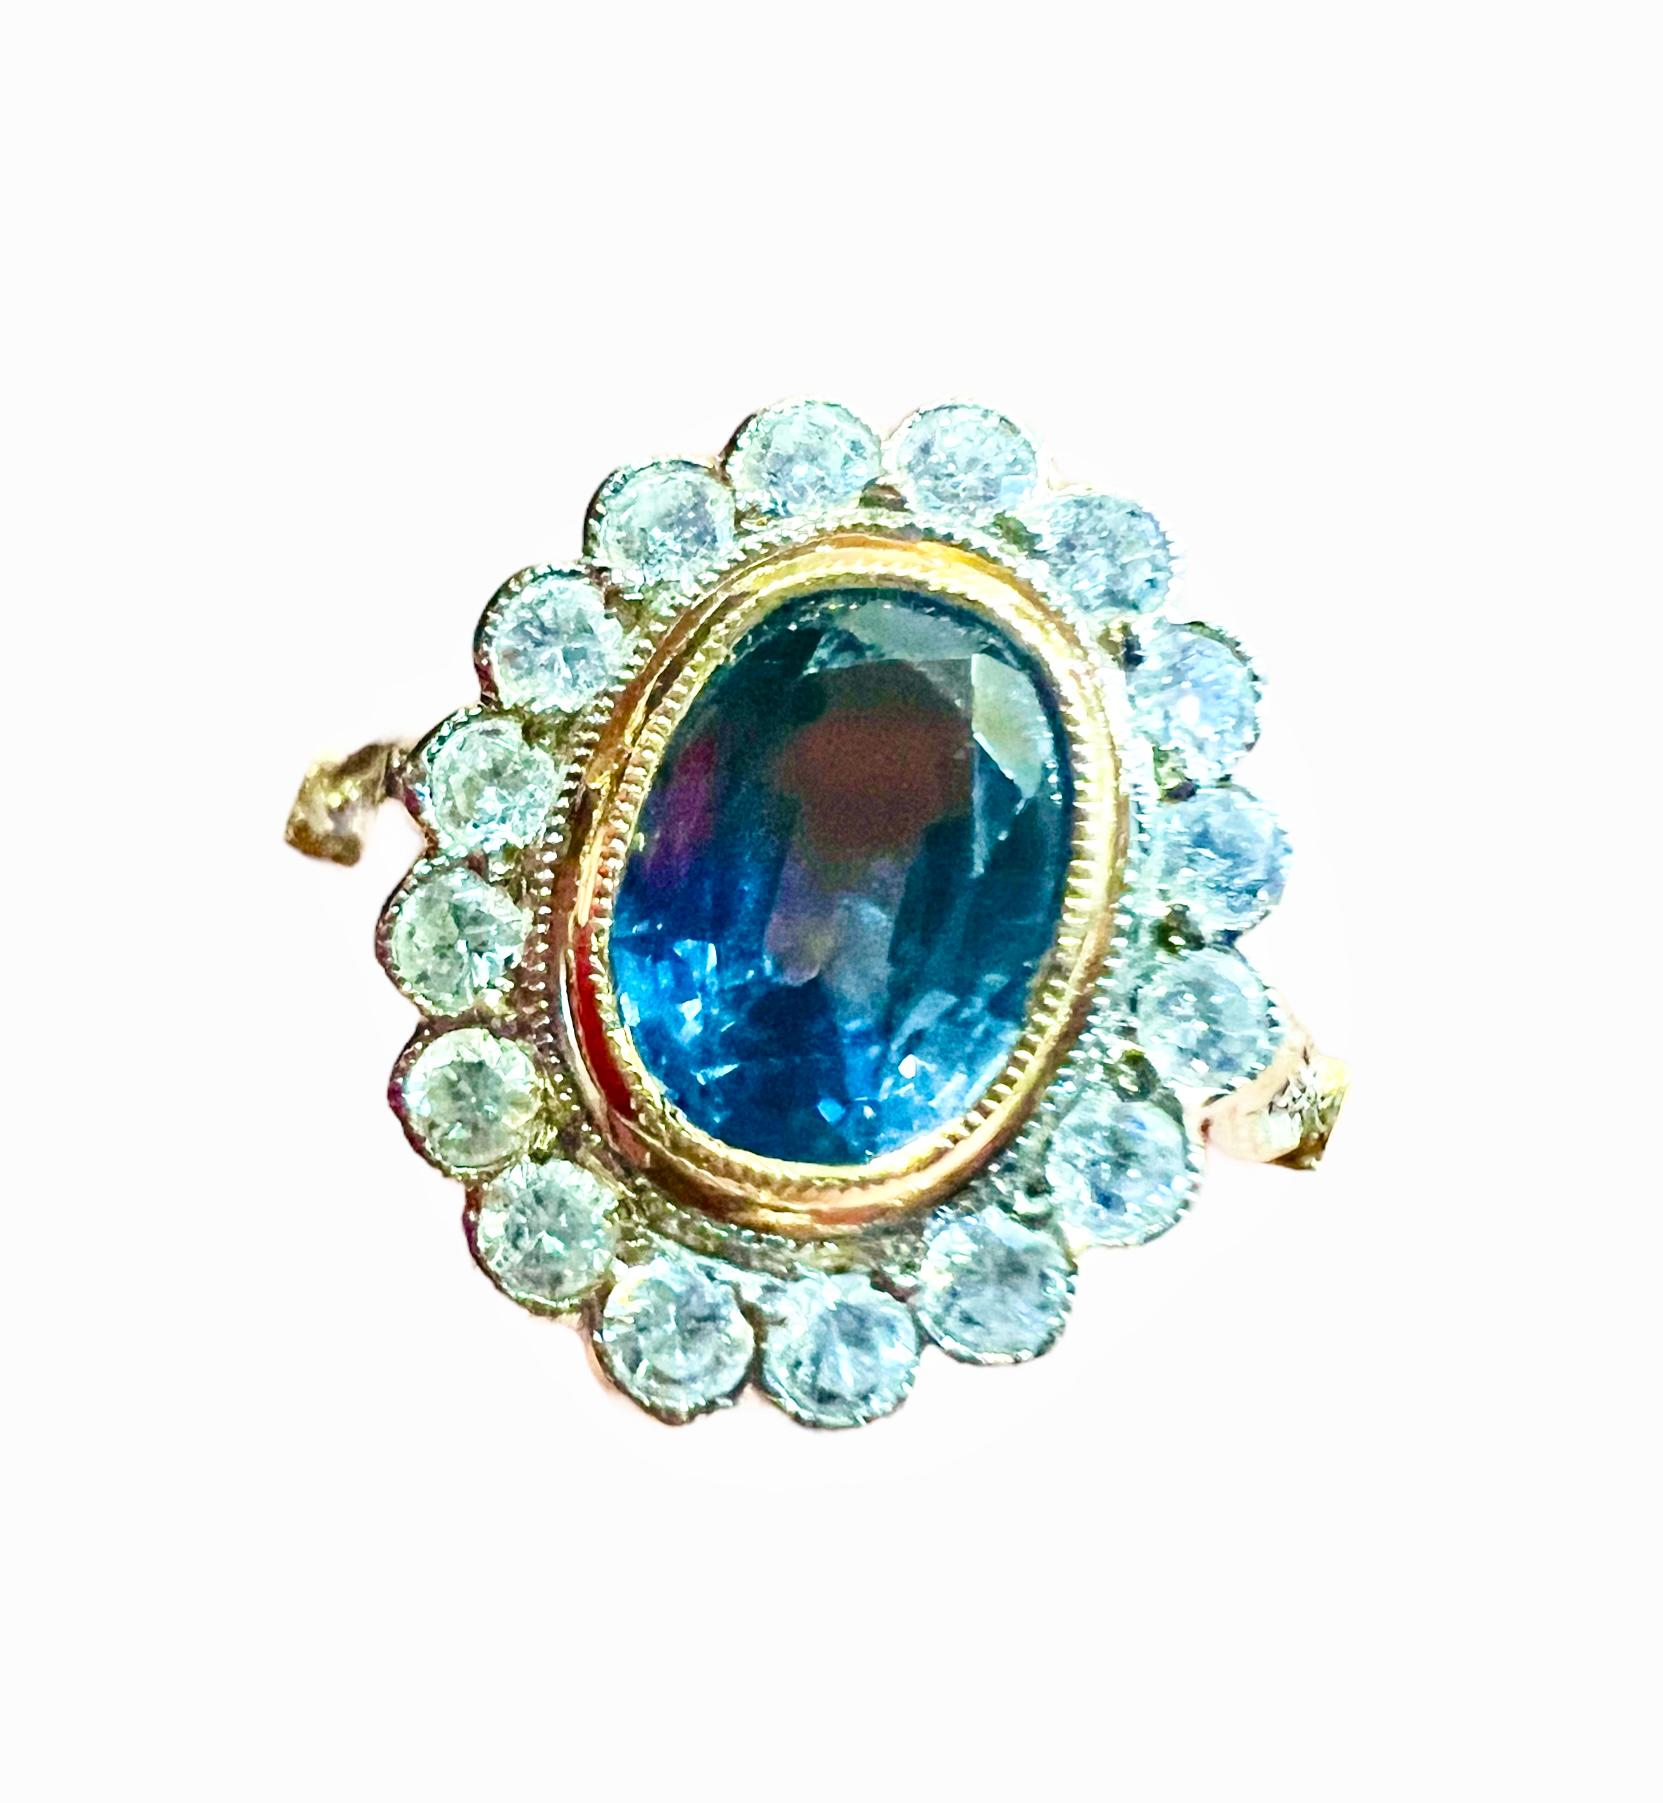 Oval Cut Ceylon sapphire ring, surrounded by diamonds in 18 carat yellow gold